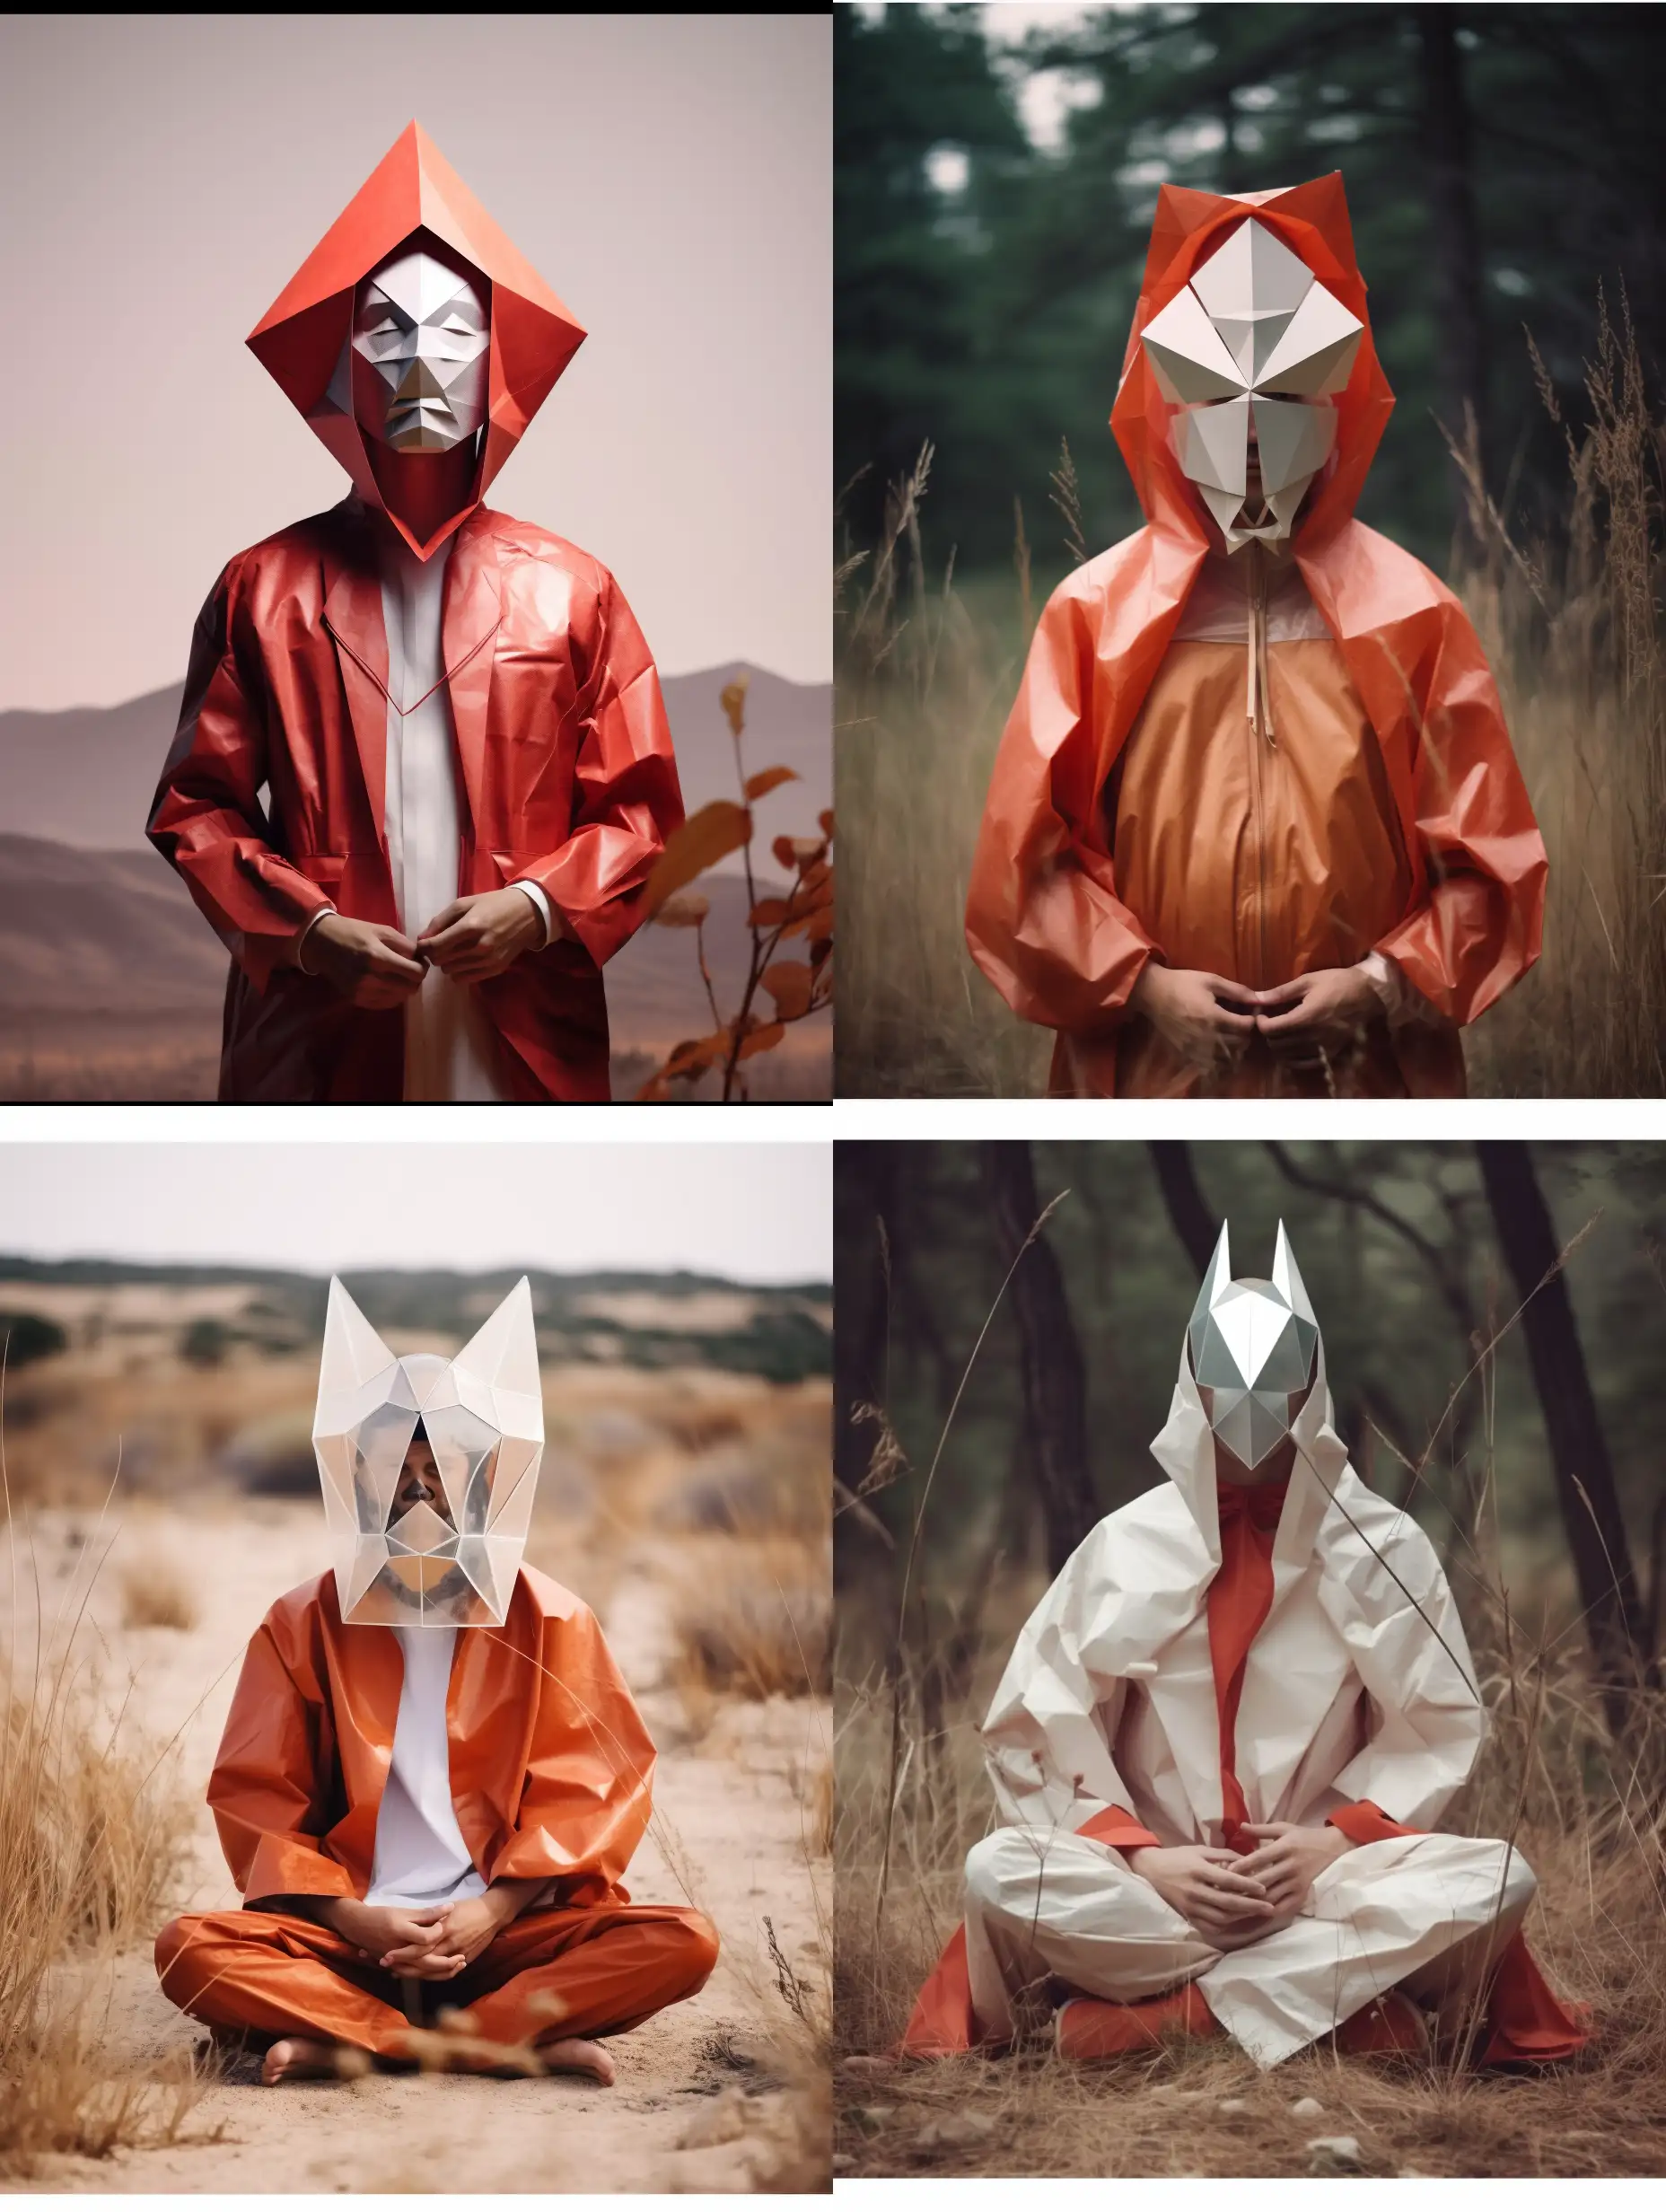 Minimalistic-Male-Figure-in-Monochromatic-Robe-with-Origami-Wooden-Mask